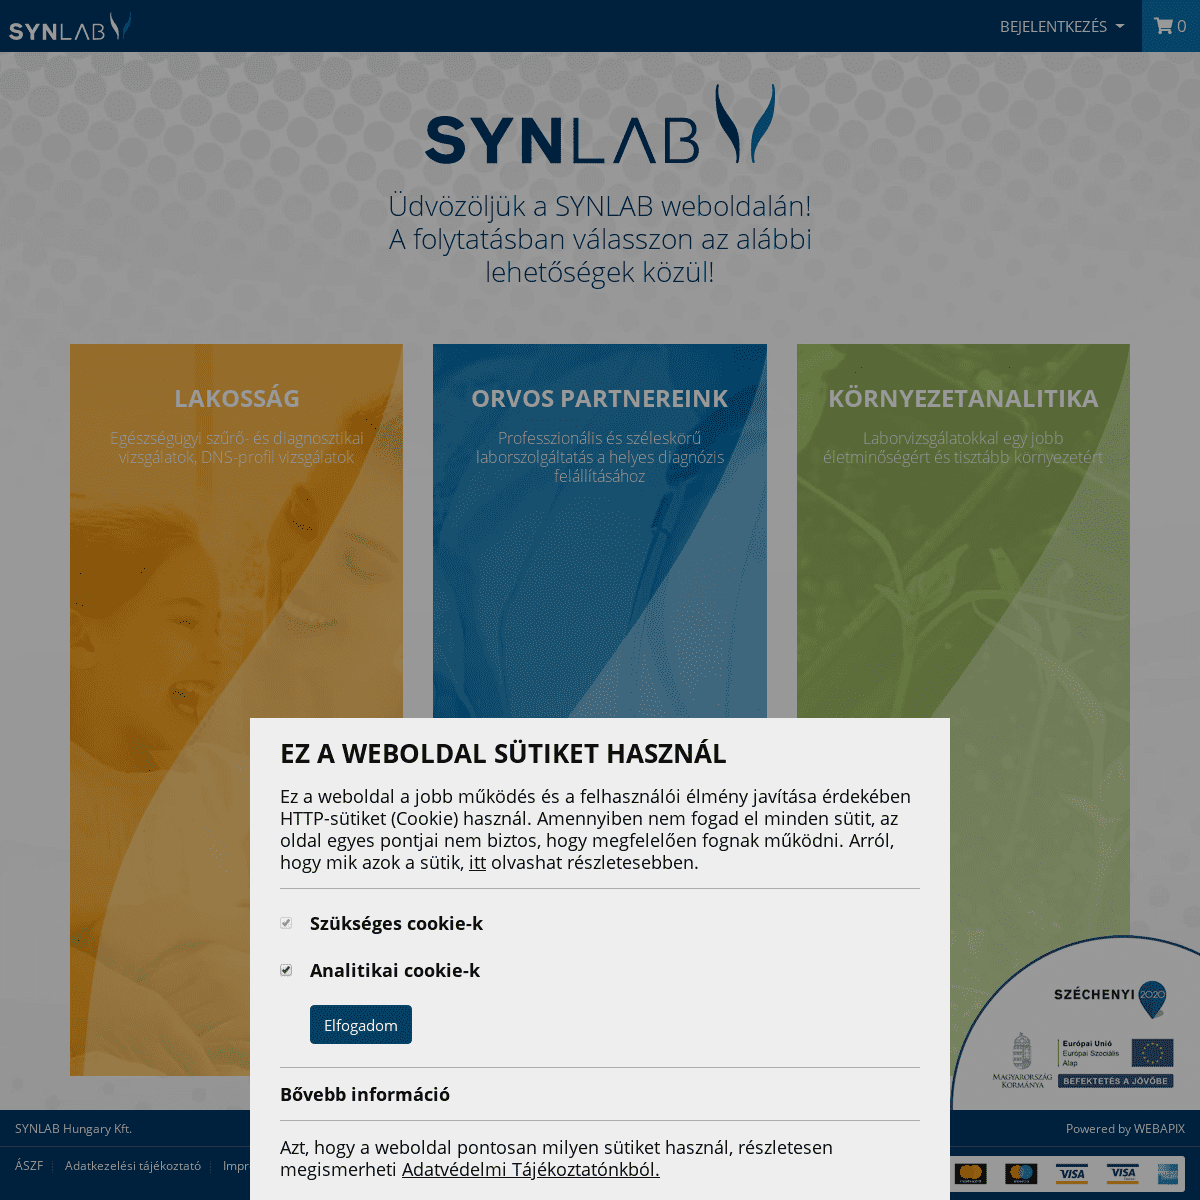 A complete backup of synlab.hu